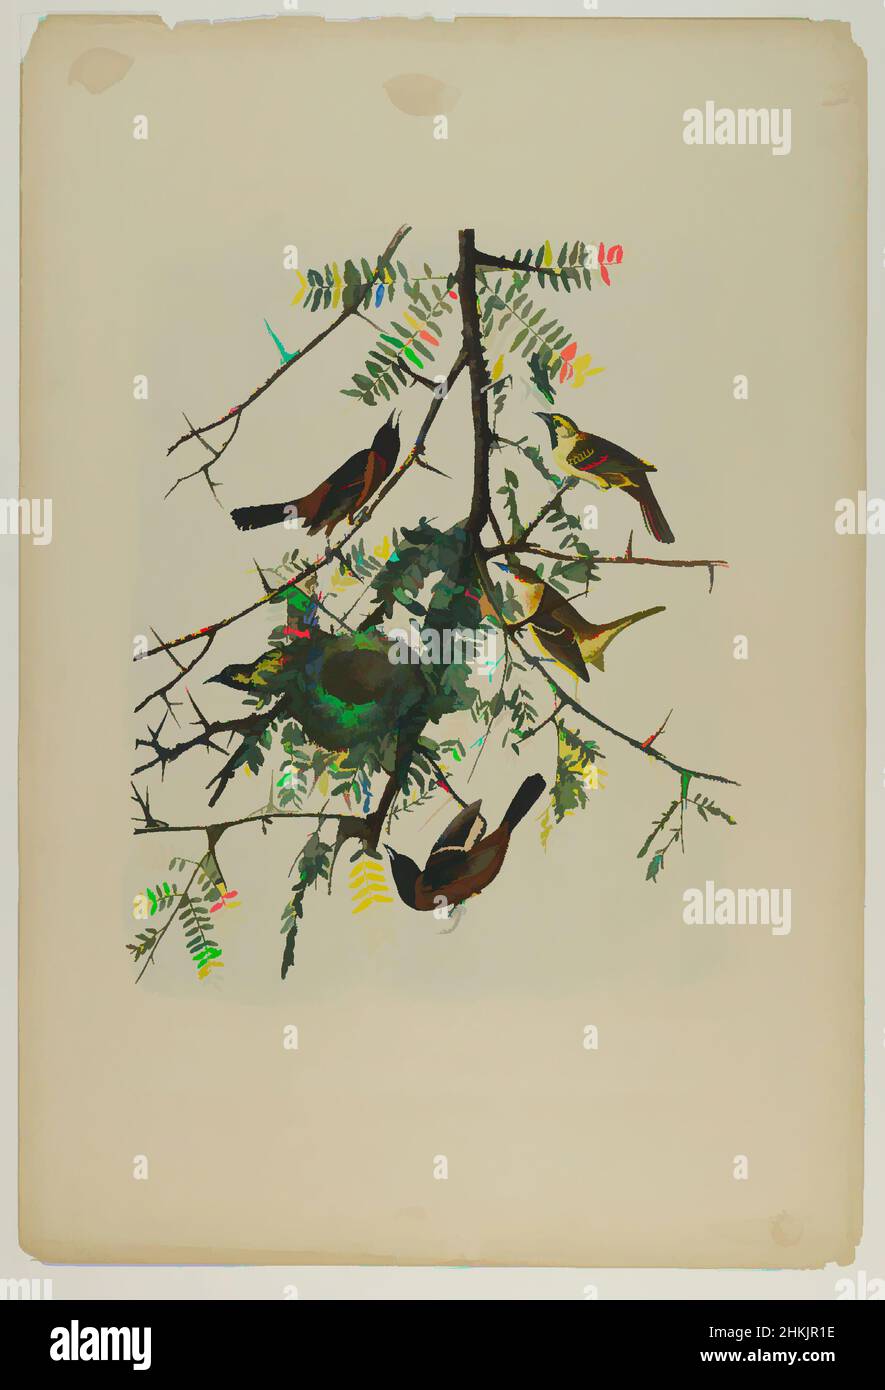 Art inspired by Orchard Oriole, John James Audubon, American, born Haiti, 1785-1851, Chromolithograph, 1861, animals, avian, birds, branch, branches, fauna, flora, Gleditschia triacanthos, honey locust, Icterus spurius, illustration, leaves, natural history, Nature, nature study, nest, Classic works modernized by Artotop with a splash of modernity. Shapes, color and value, eye-catching visual impact on art. Emotions through freedom of artworks in a contemporary way. A timeless message pursuing a wildly creative new direction. Artists turning to the digital medium and creating the Artotop NFT Stock Photo